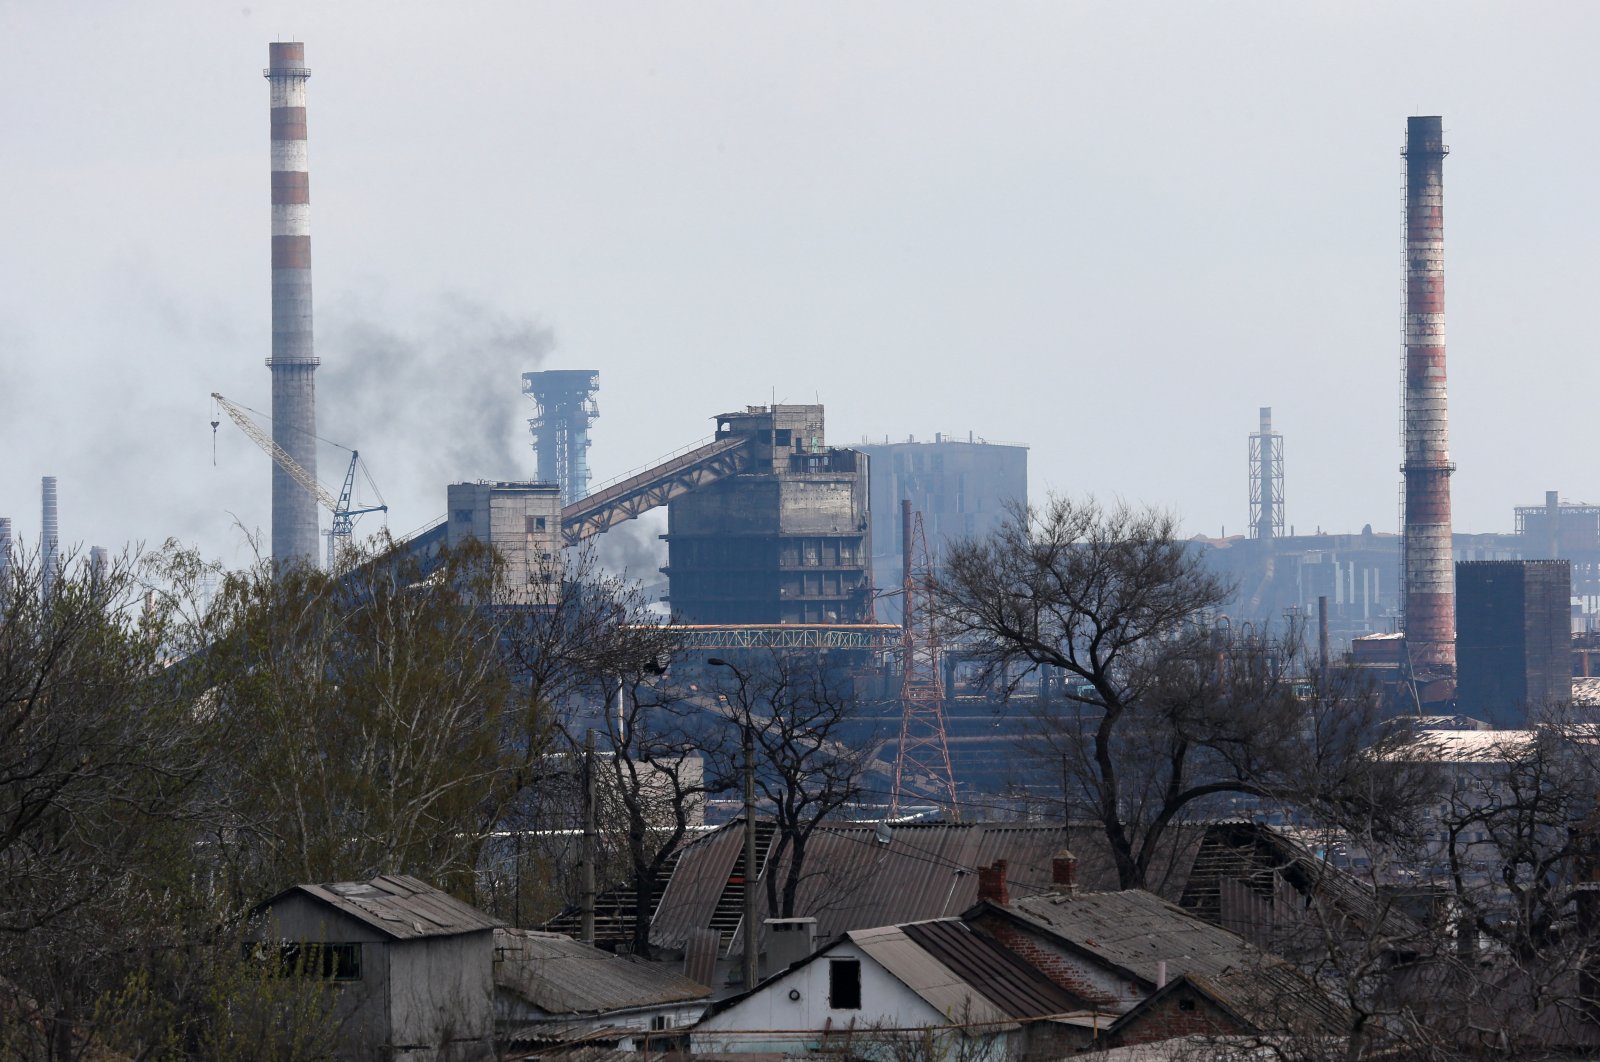 A view shows a plant of Azovstal Iron and Steel Works during Ukraine-Russia conflict in the southern port city of Mariupol, Ukraine, April 22, 2022. (Reuters Photo)